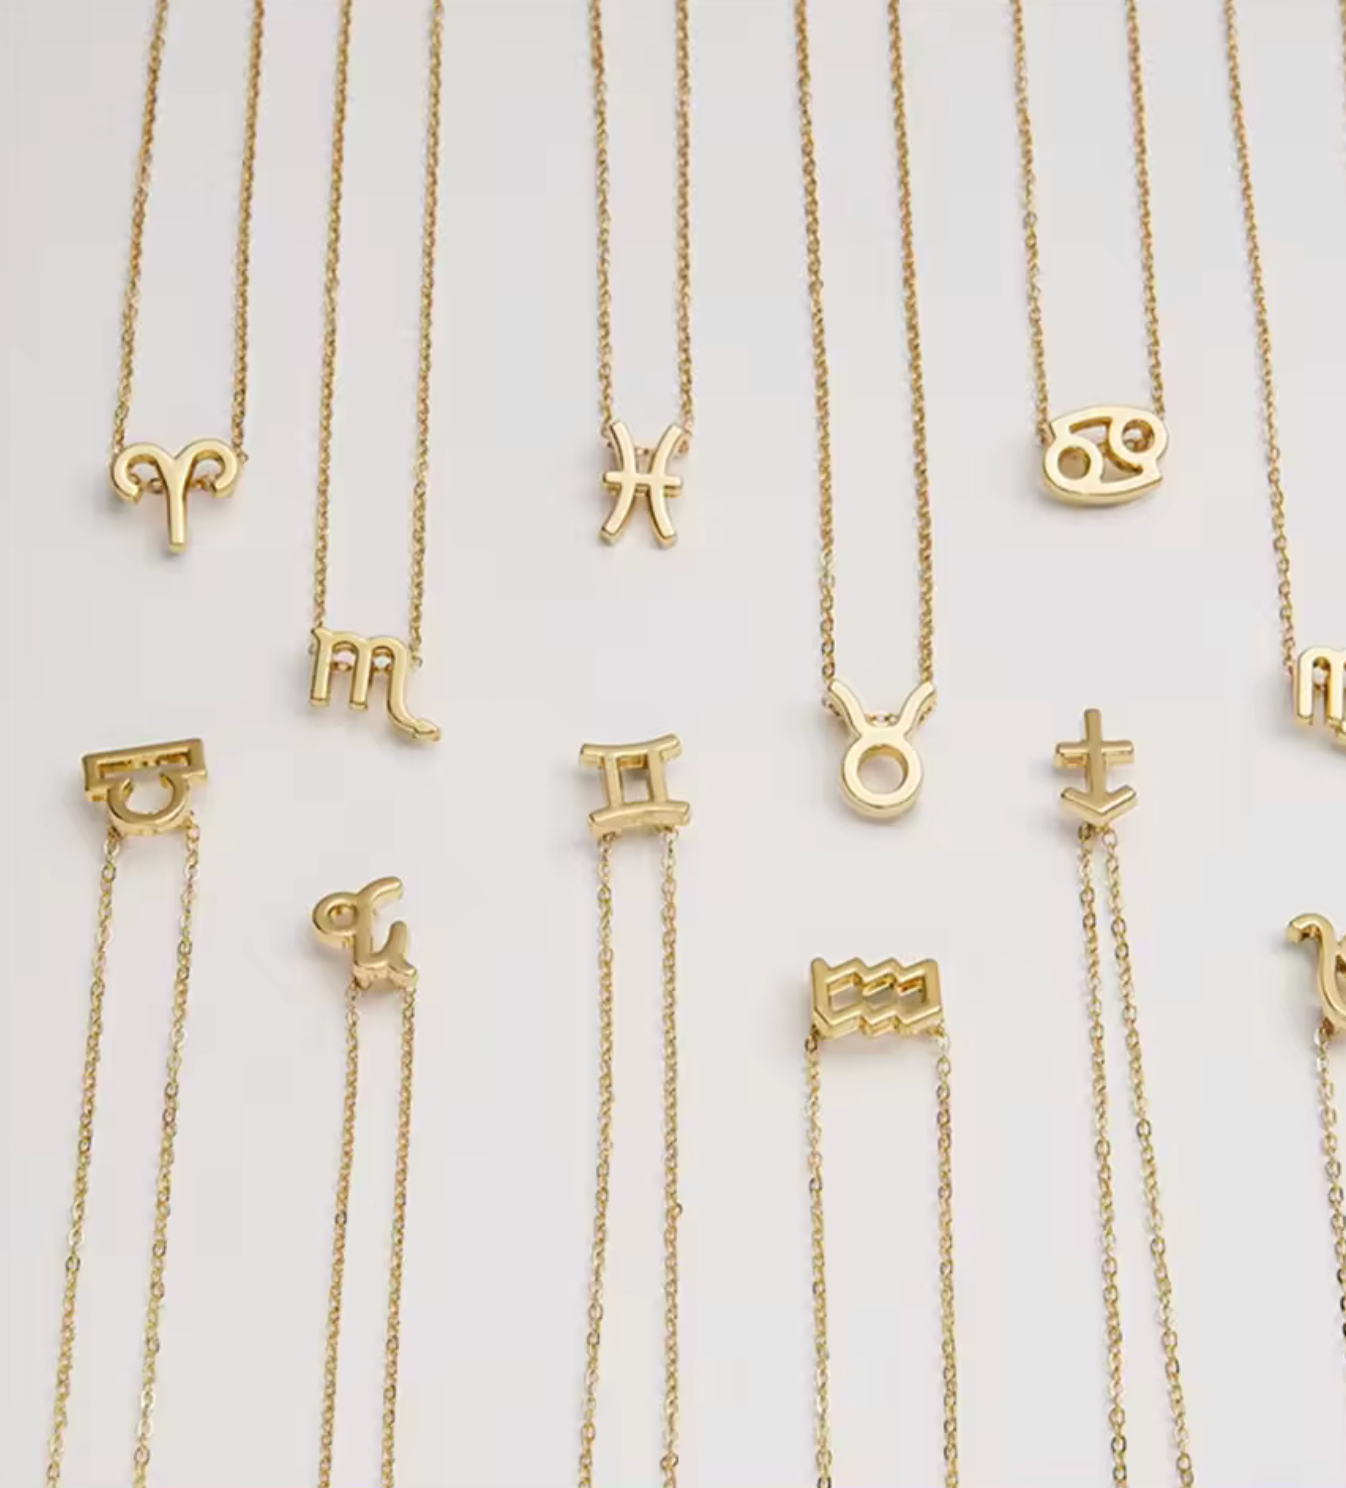 Waterproof Zodiac necklace • Gold Silver chain • stainless steel